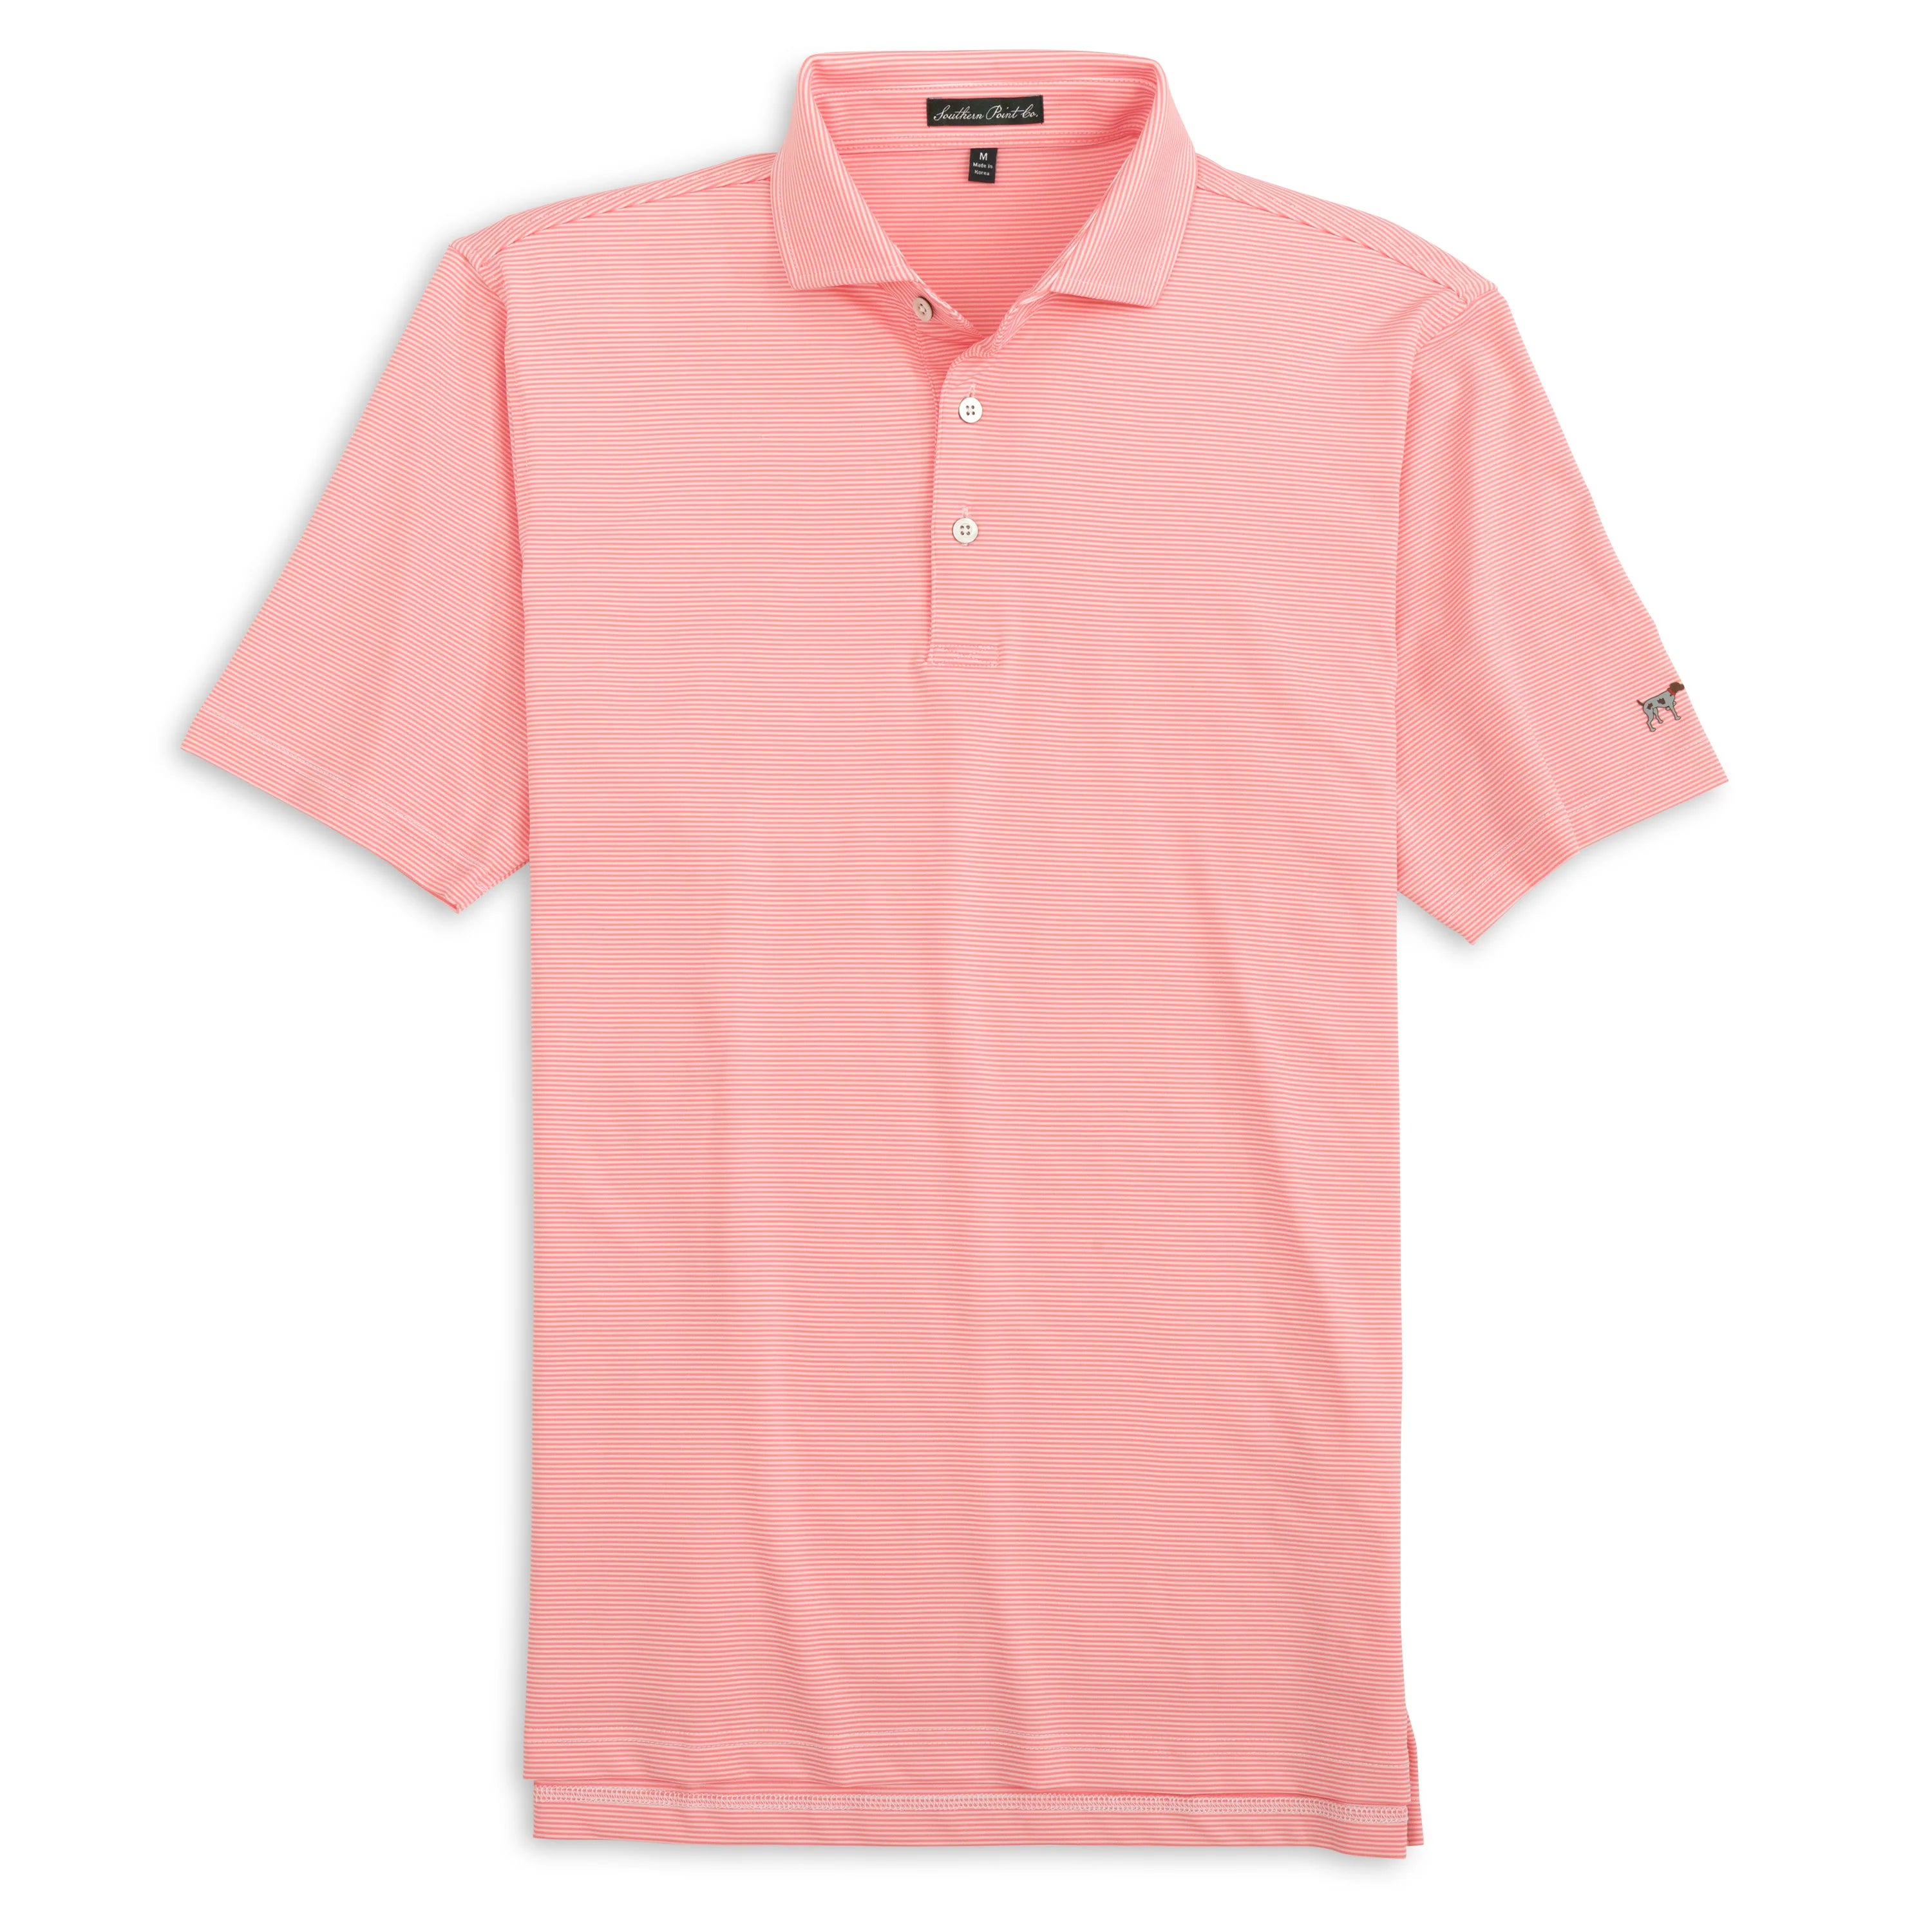 The Hinton Stripe Polo in White Flamingo by Southern Point Co.